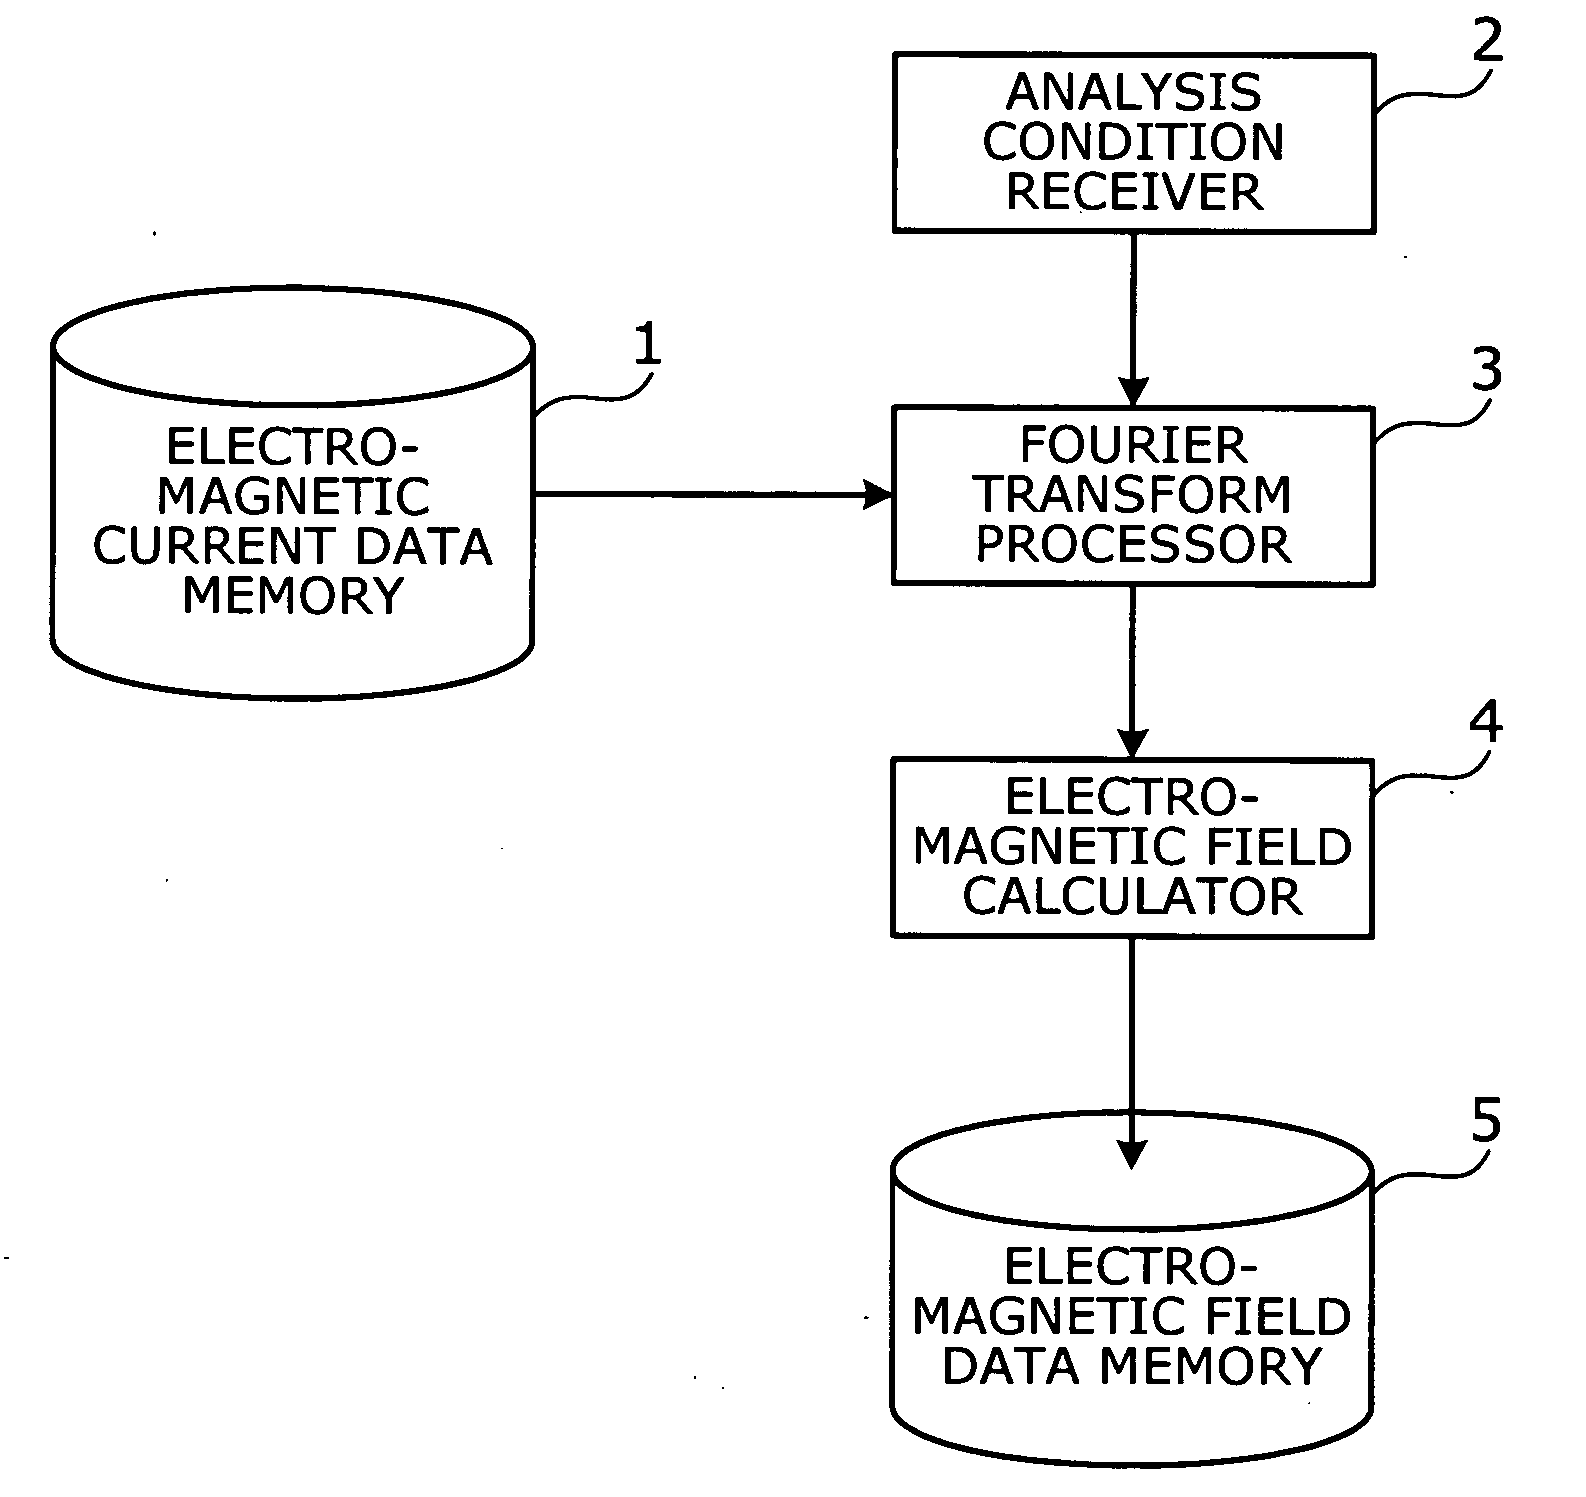 Computer program, apparatus, and method for analyzing electromagnetic waves